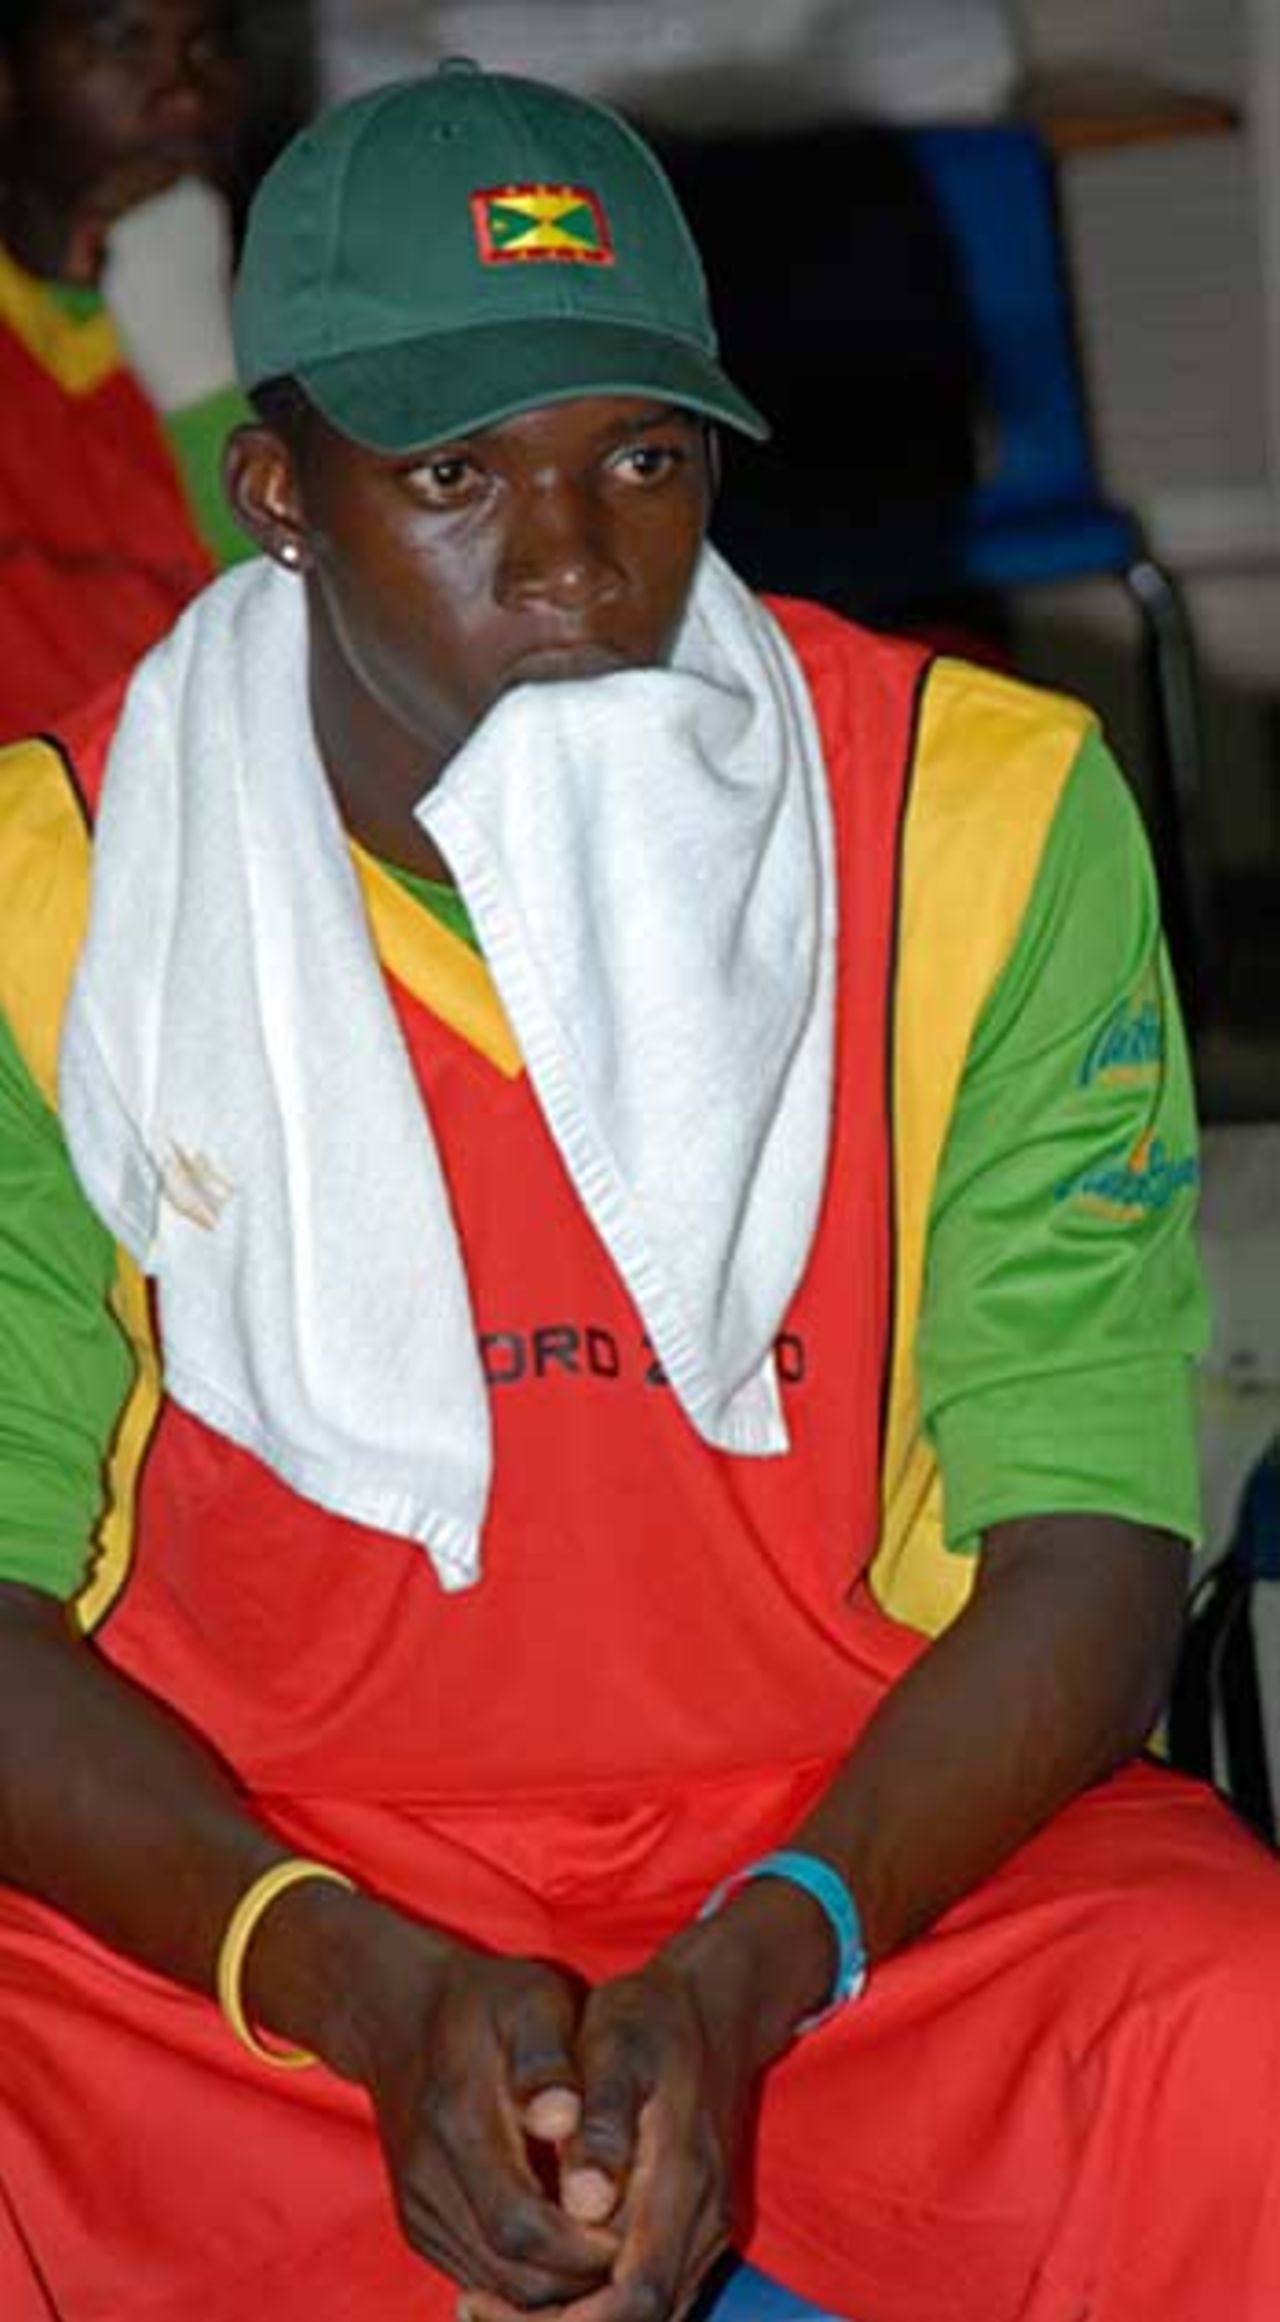 Heart - and towel - in mouth time for Grenada, Grenada v Guyana, Stanford 20/20, 1st semi-final, 10 August 2006

